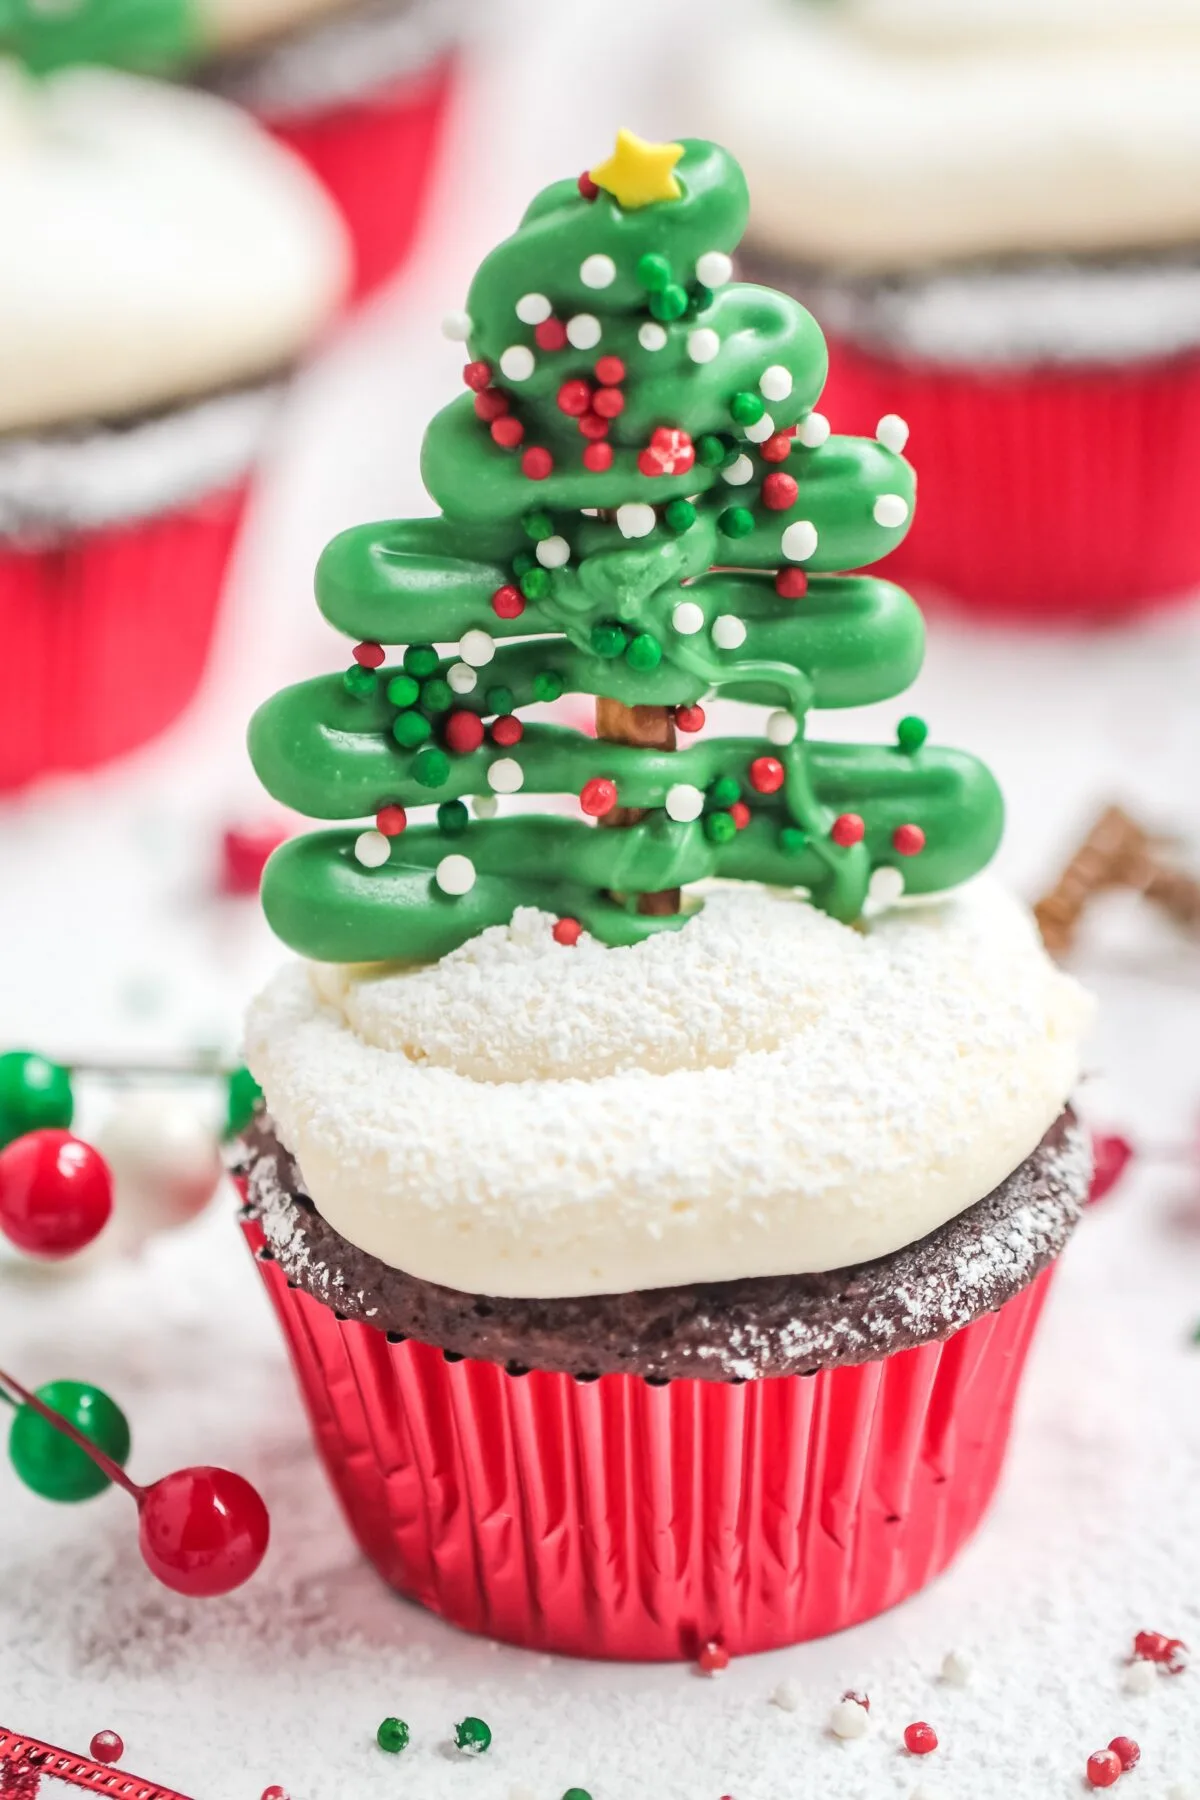 This festive and fun Christmas tree cupcakes recipe make a great treat for the holidays, featuring moist, fluffy homemade chocolate cupcakes!